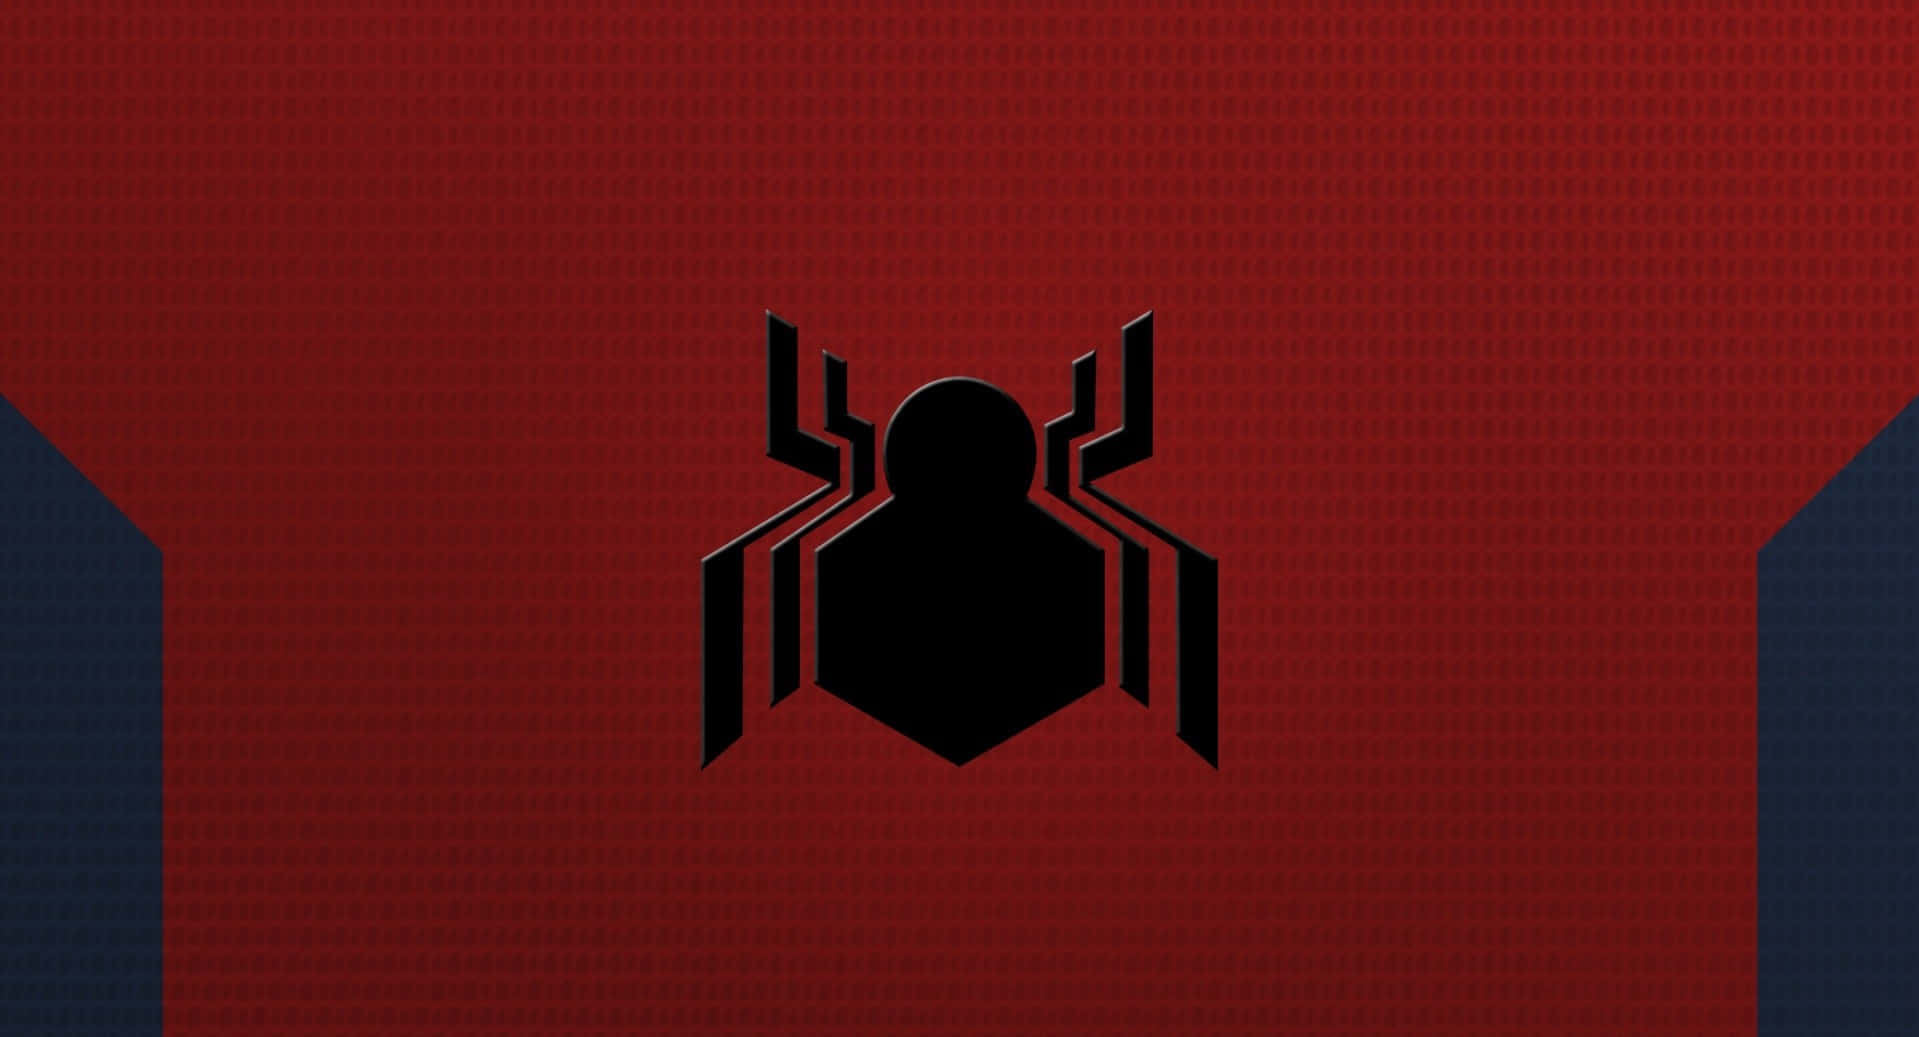 The Spider Man Logo Adorns The Iconic Red And Blue Suit Worn By The Classic Superhero. Wallpaper